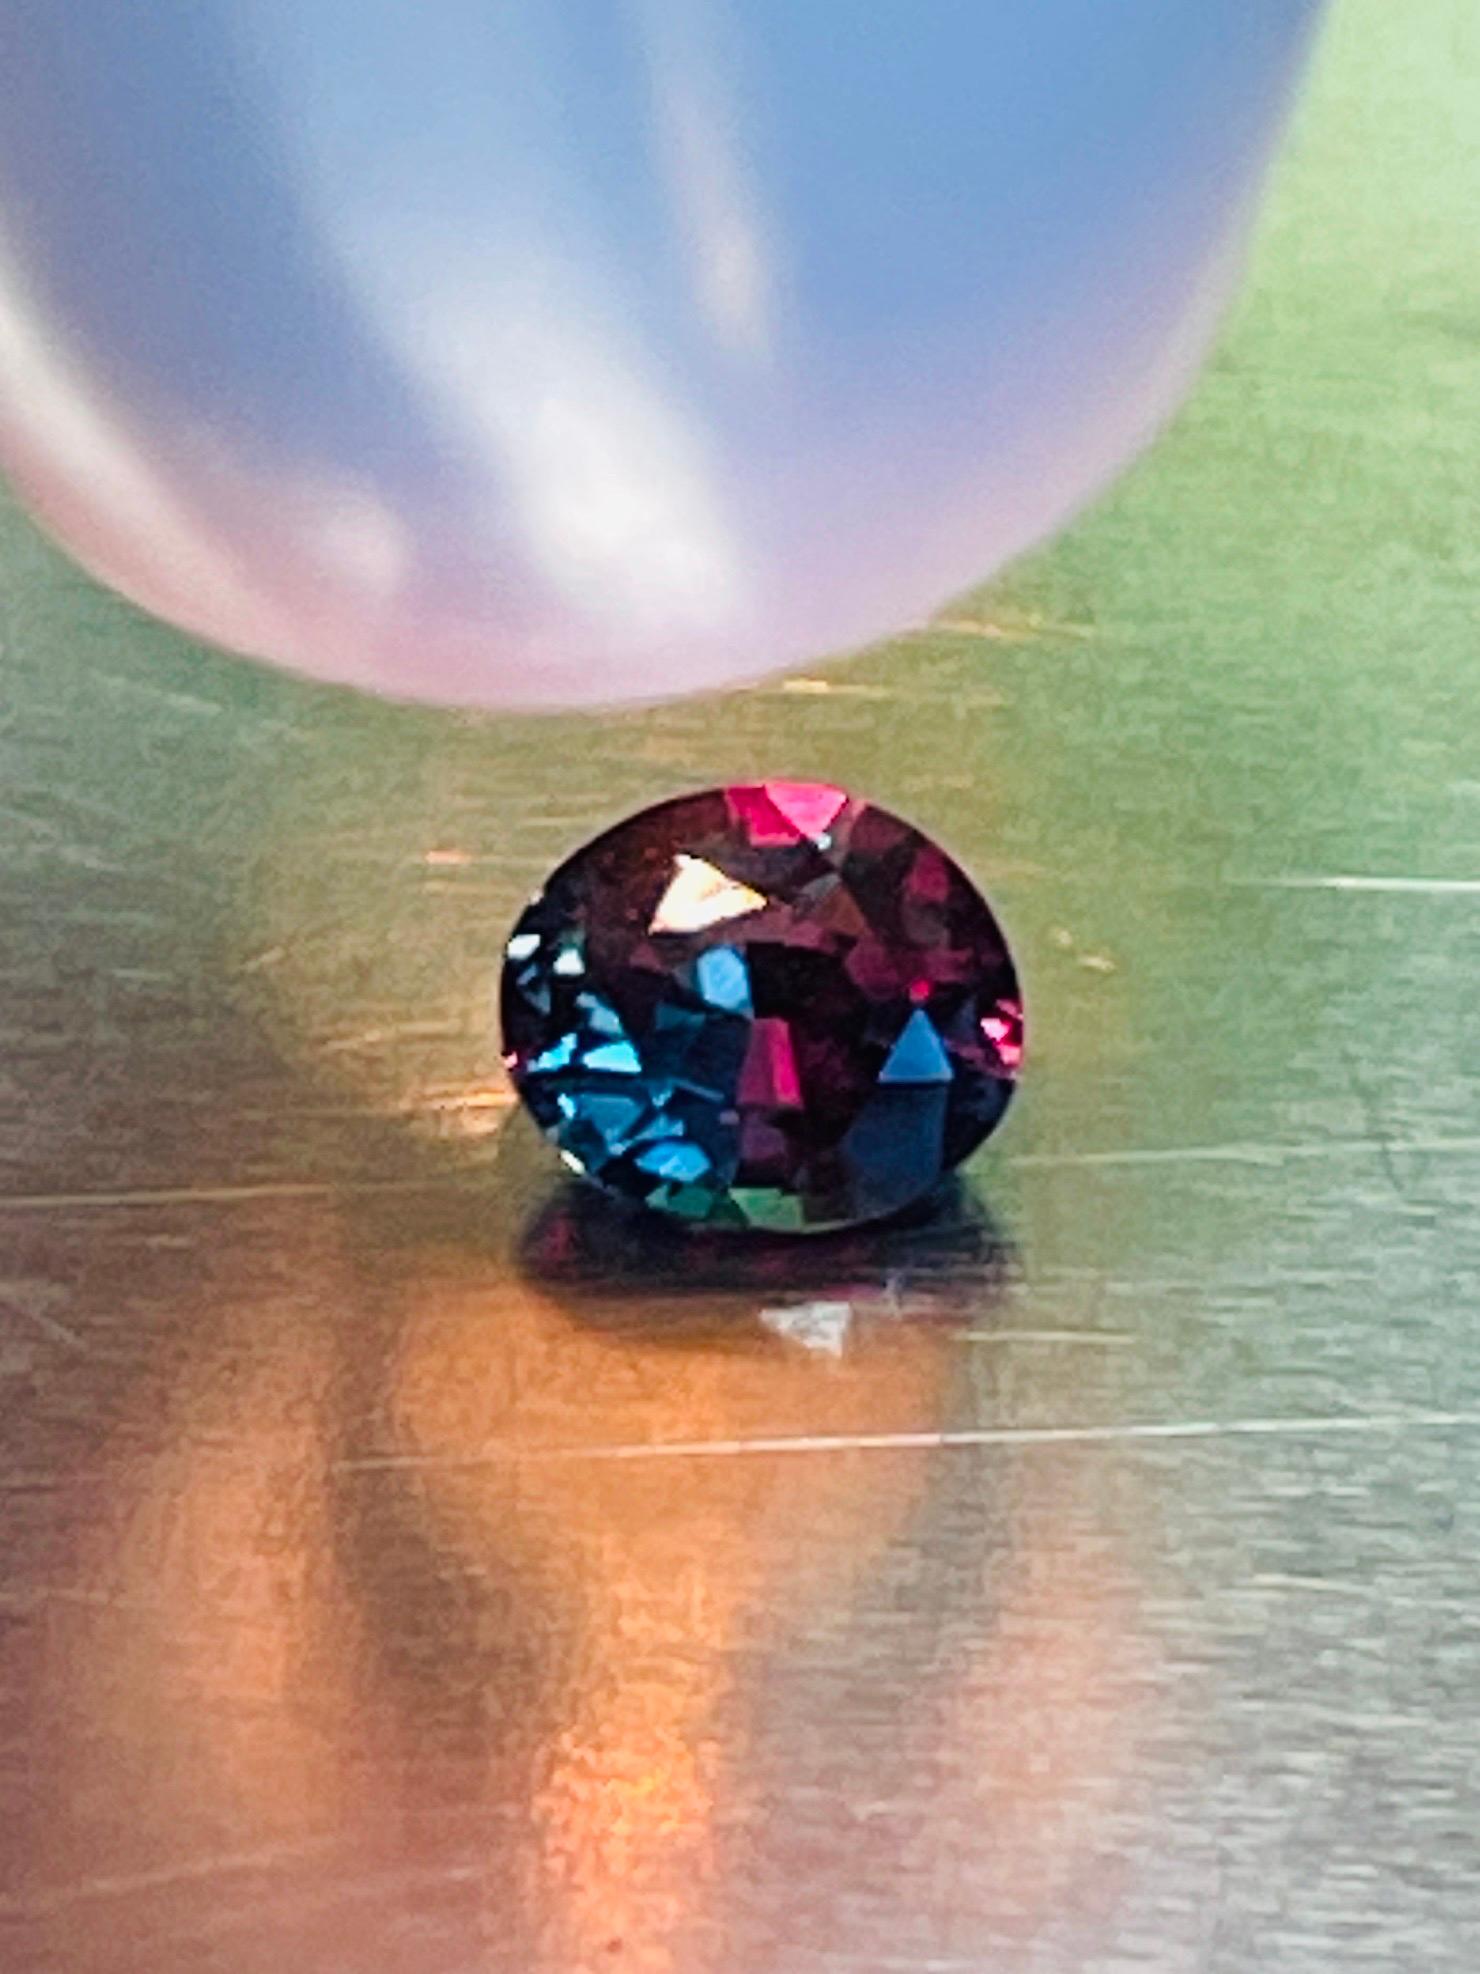 AXA09

Alexandrite 0.24ct deep green to pinkish color change rare gemstone 

Weight: 0.24ct
Size: 4.1*3.4*2.5mm
Origine: Srilanka 
Color Deep Green to pinkish 
Clarity Eye clean 
Top quality selected by WB GEM
